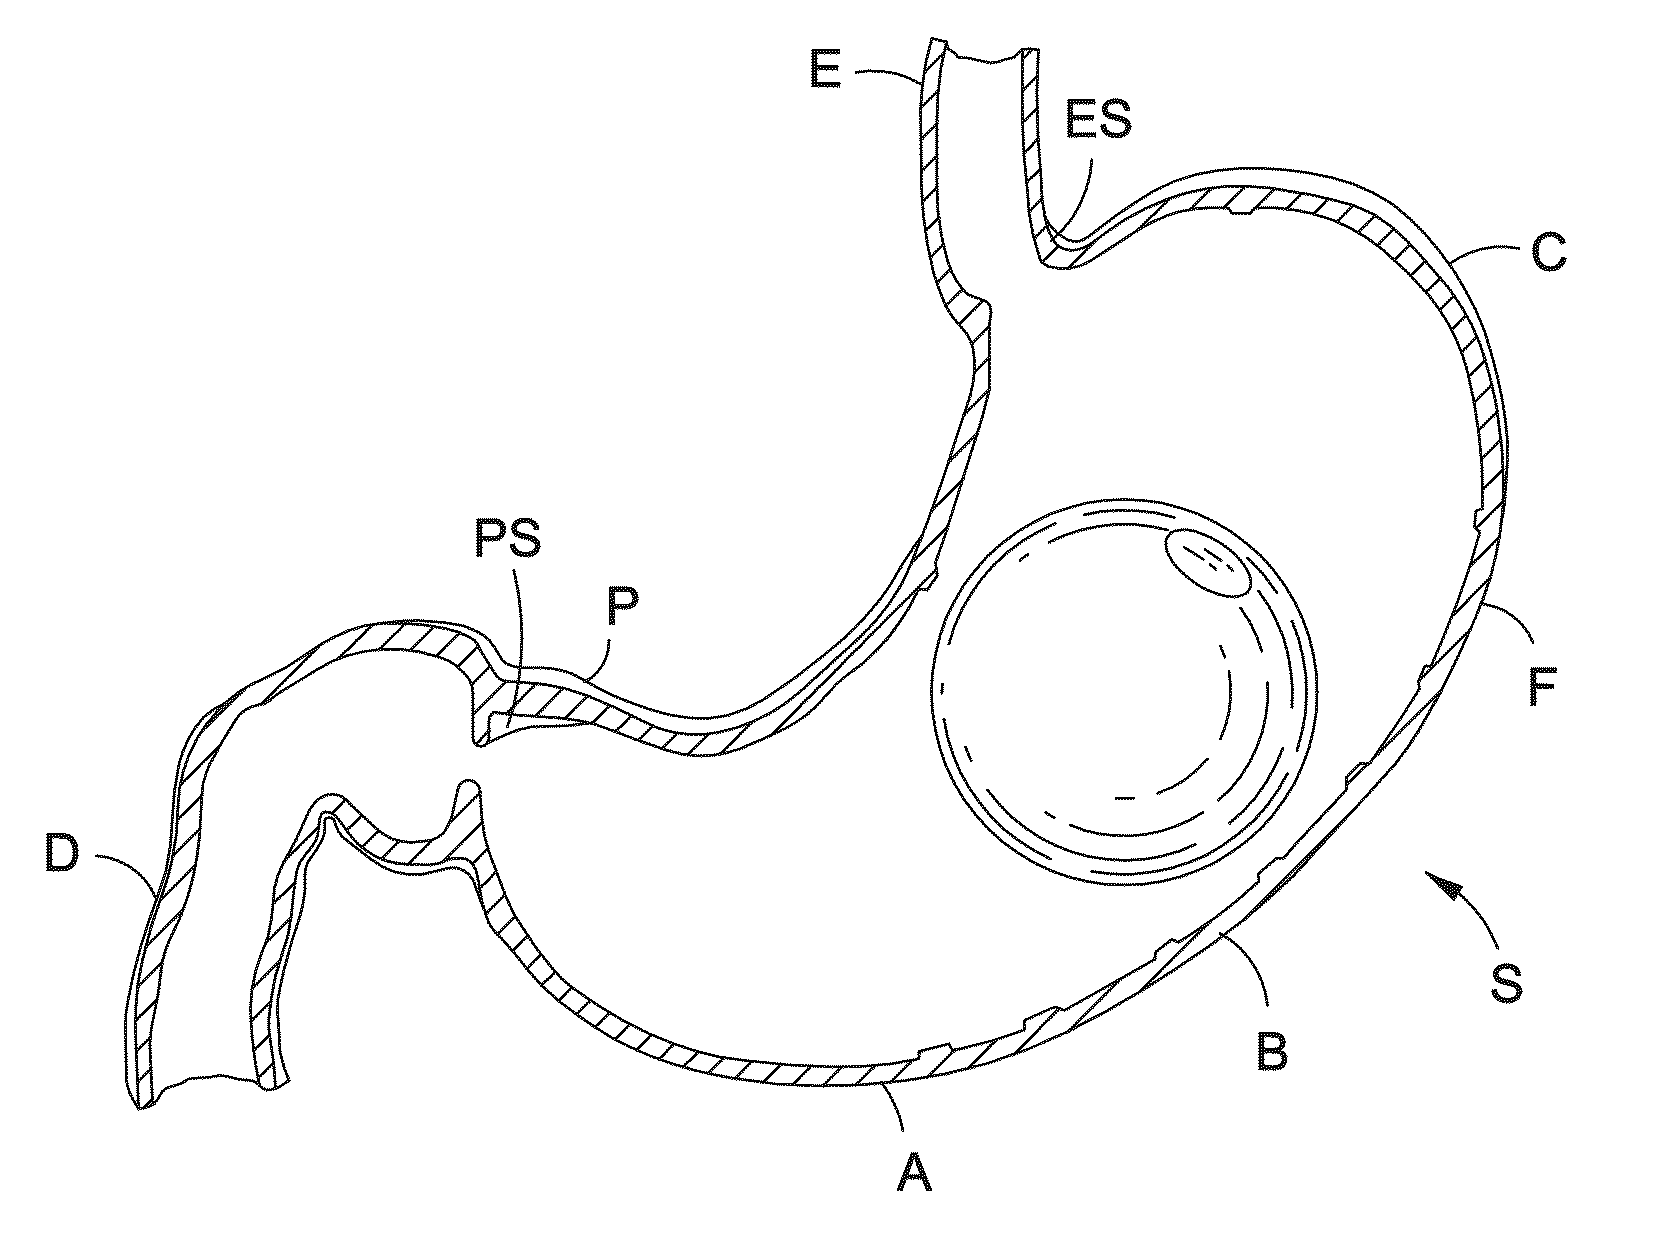 Intragastric balloon shell materials and construction